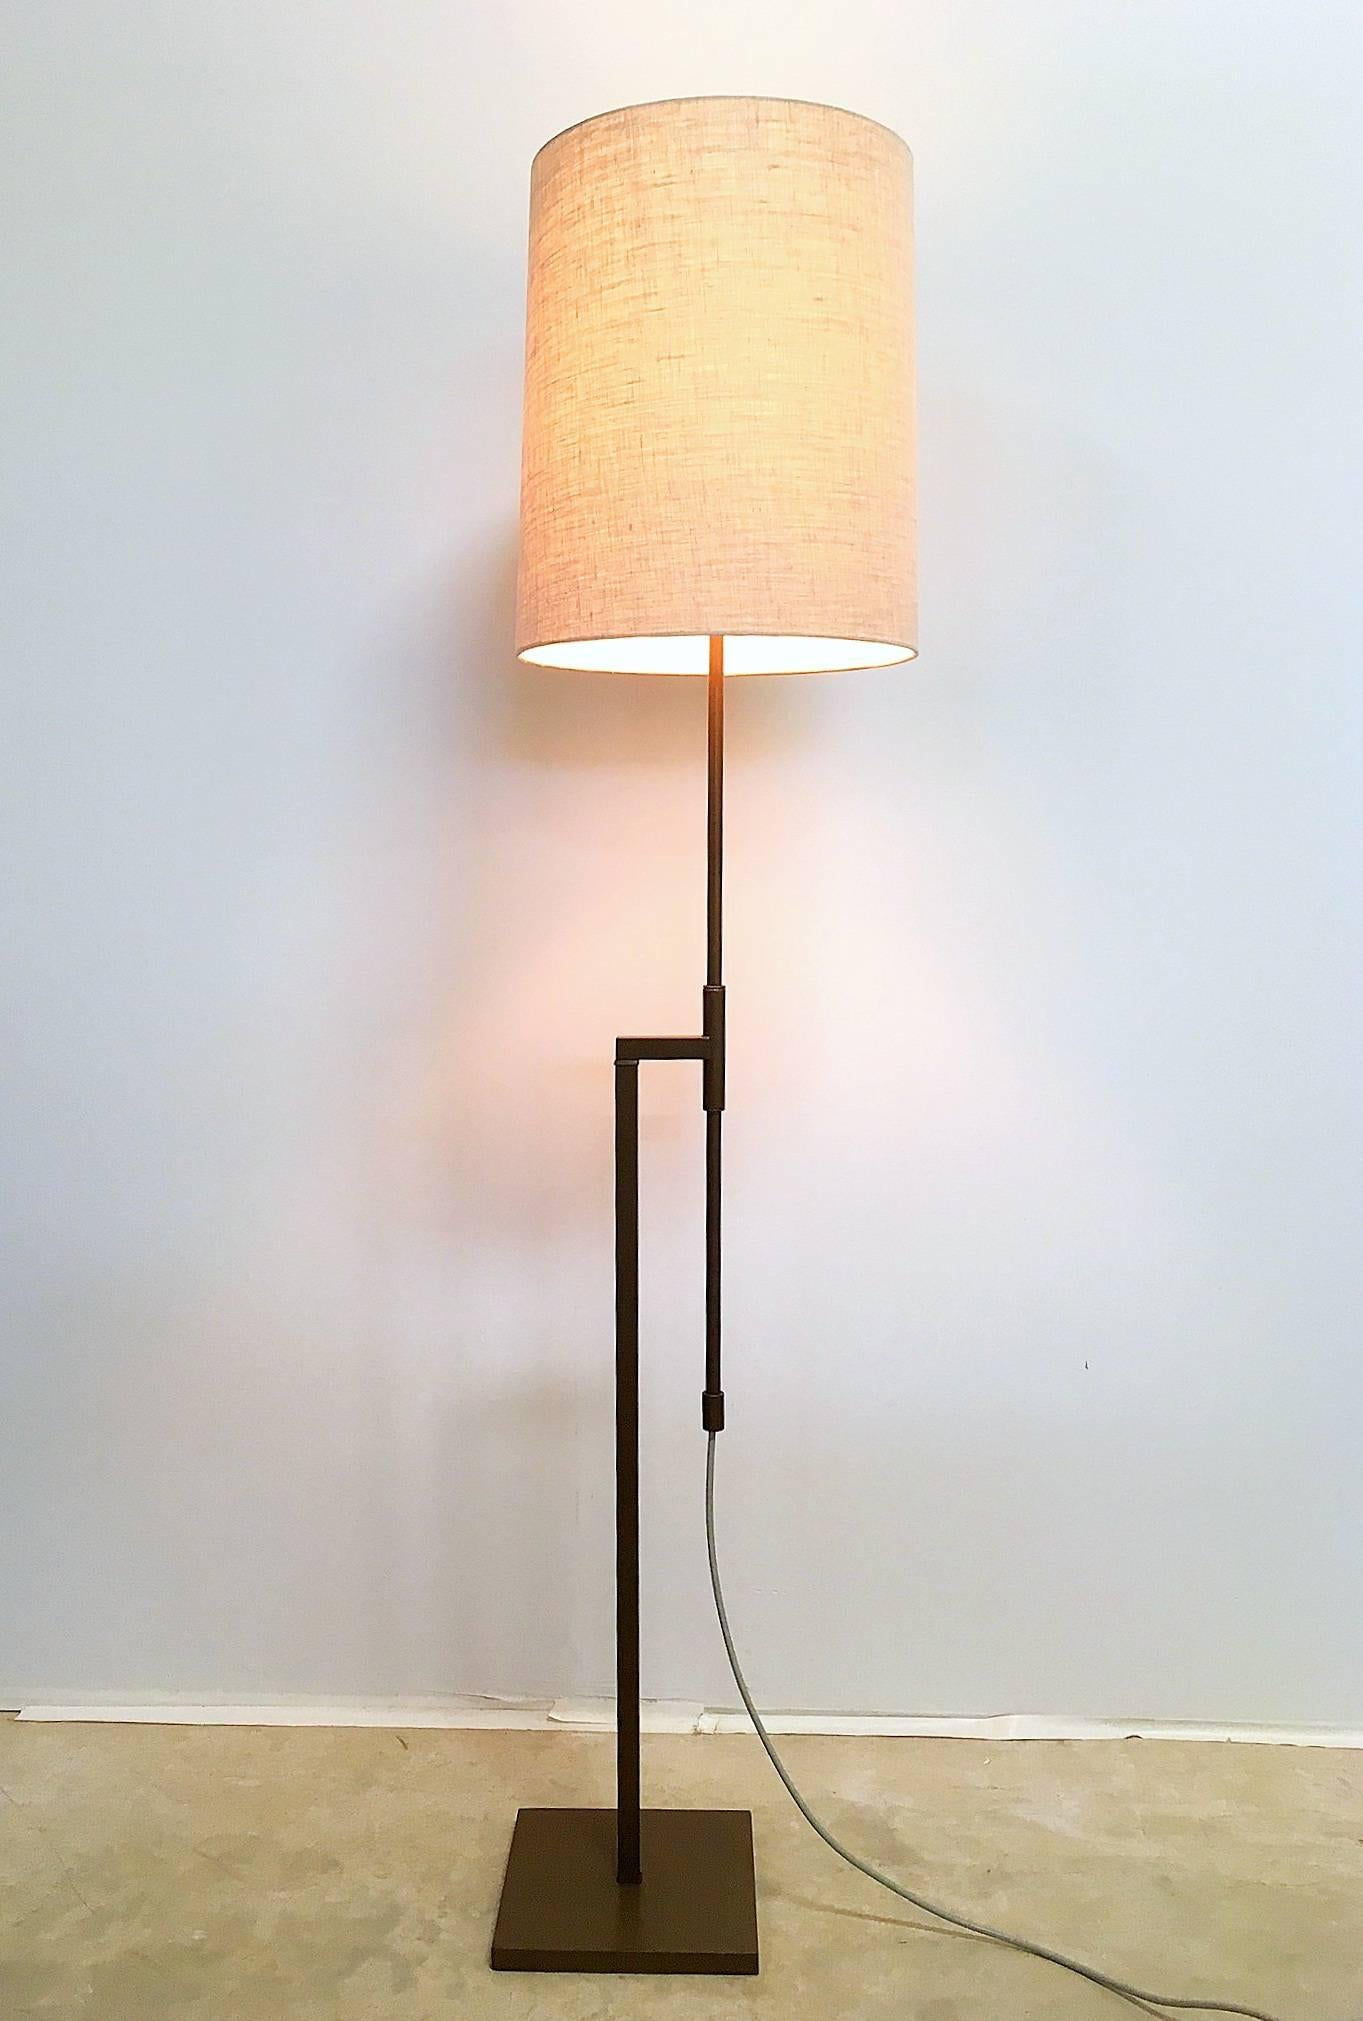 A modernist adjustable floor lamp by Laurel with an antique bronze powder coat finish. The cantilevered square tube stand connects a round tube pole that adjusts in height (45 - 67 inches), the whole rests on a square weighted base. Included is a